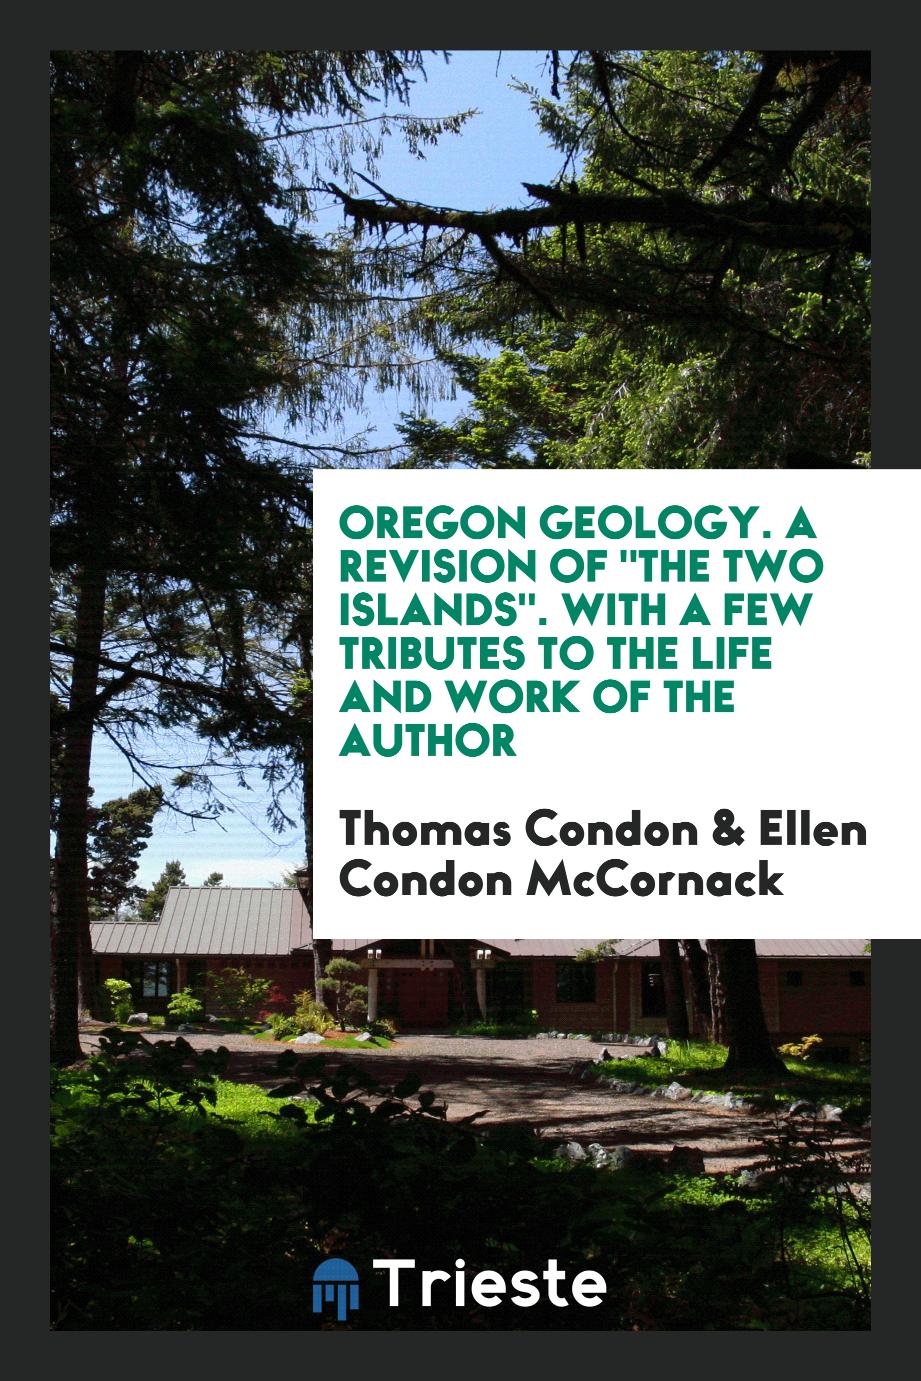 Oregon Geology. A Revision of "The Two Islands". With a Few Tributes to the Life and Work of the Author